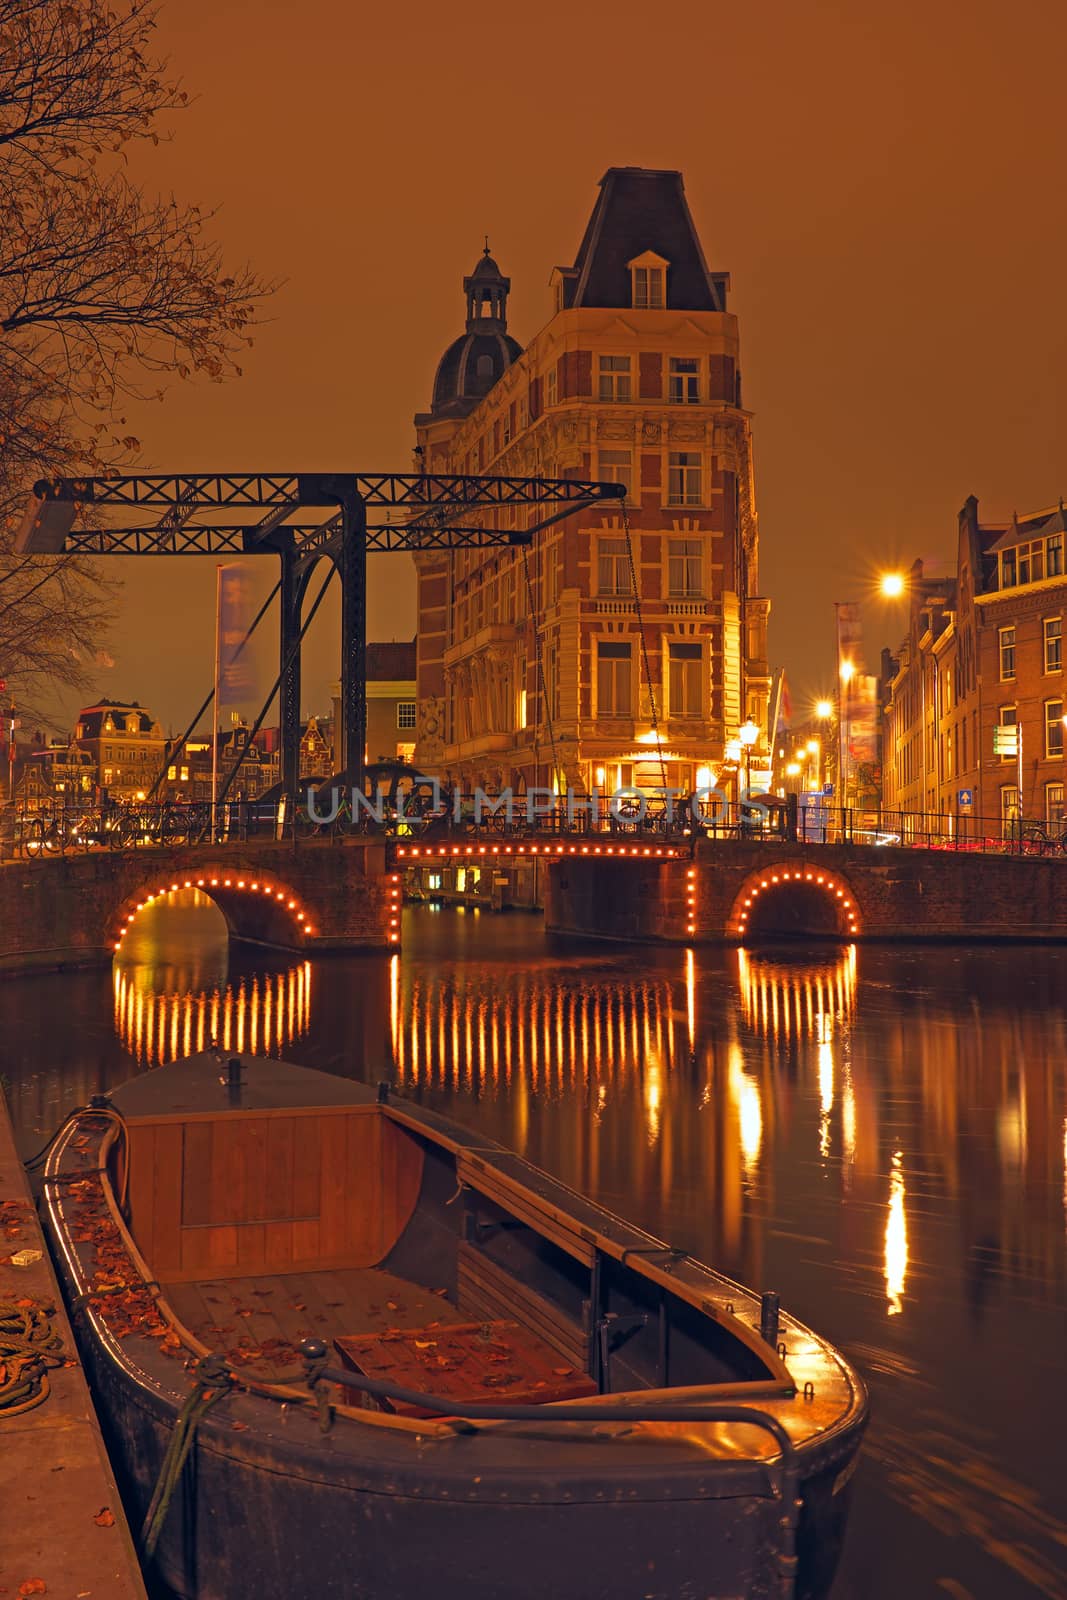 City scenic in Amsterdam Netherlands by night by devy